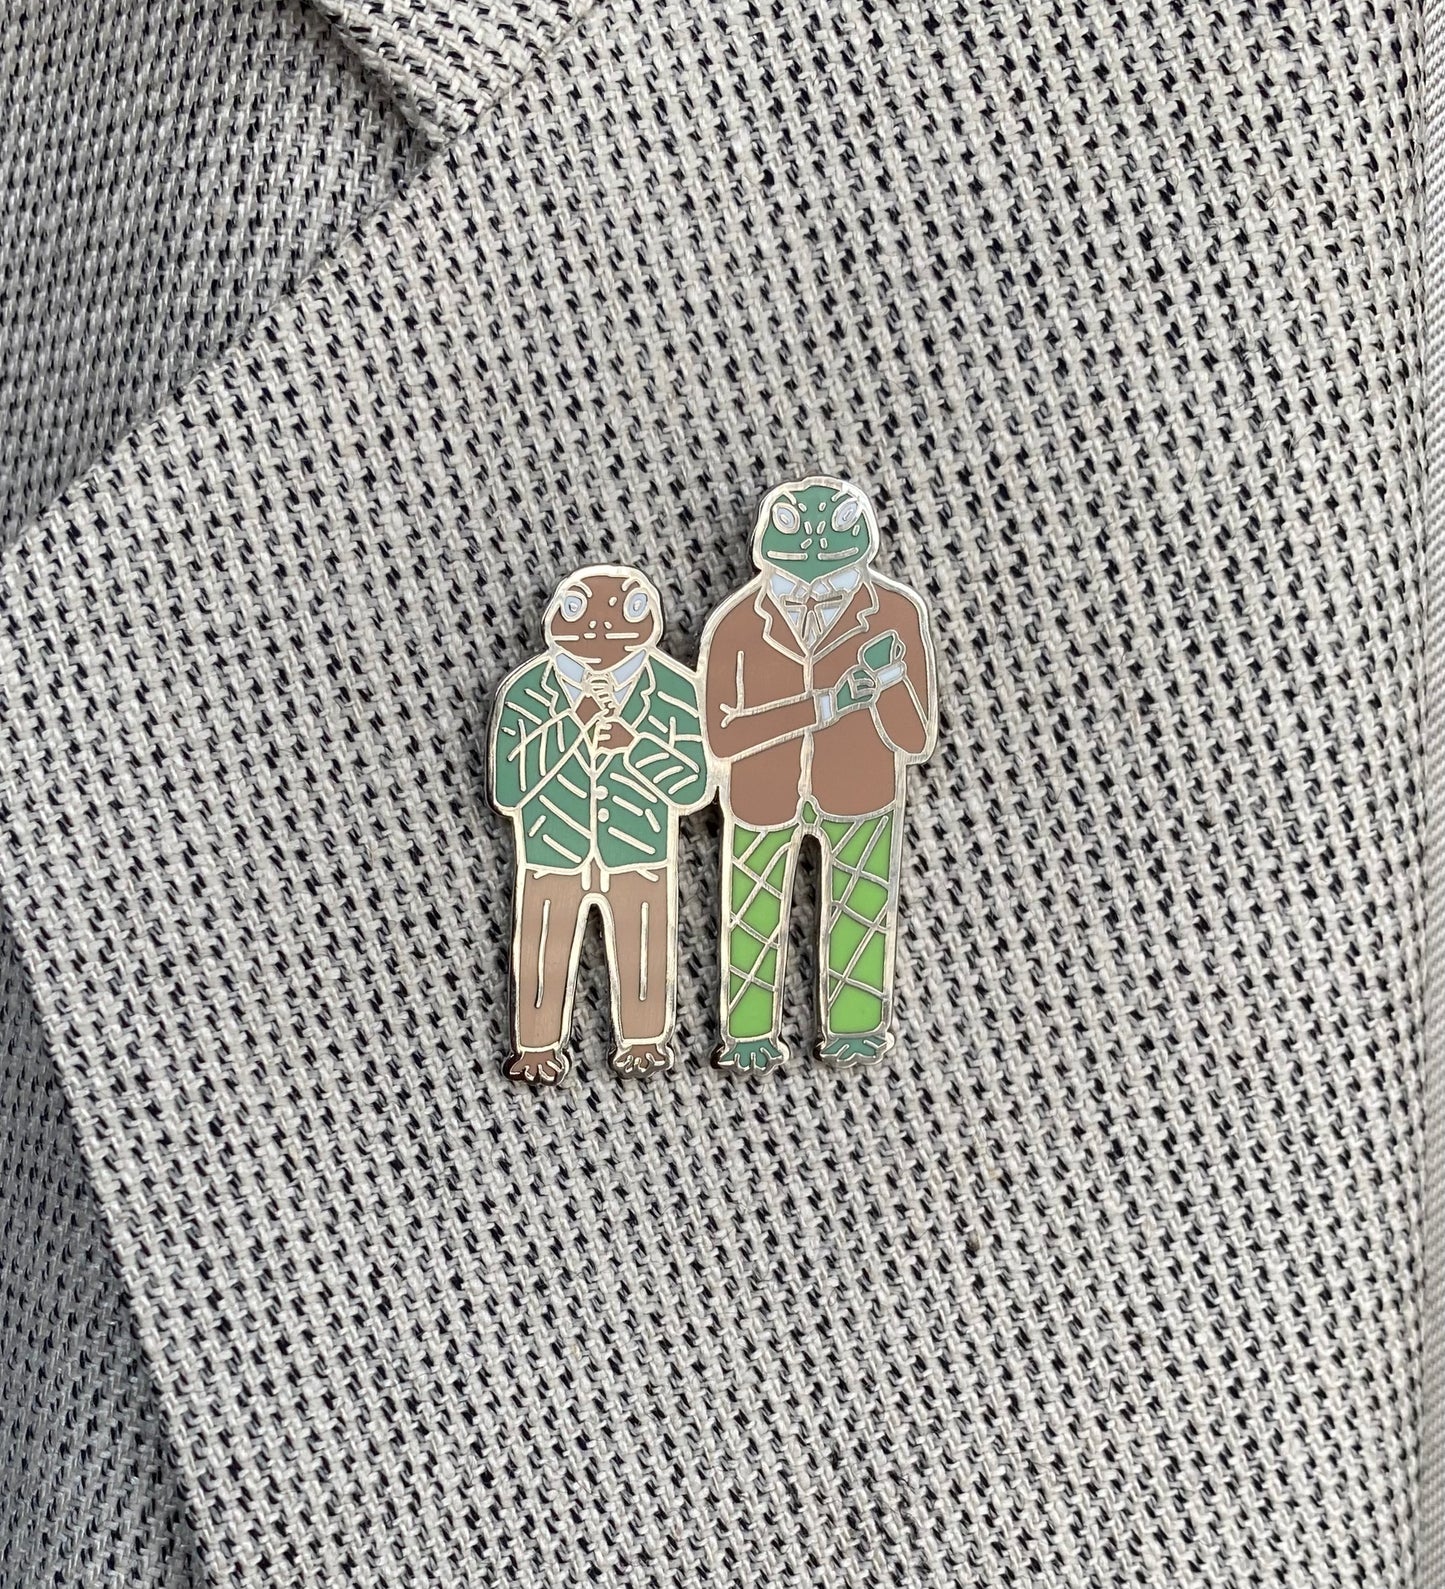 Two Frogs Pin